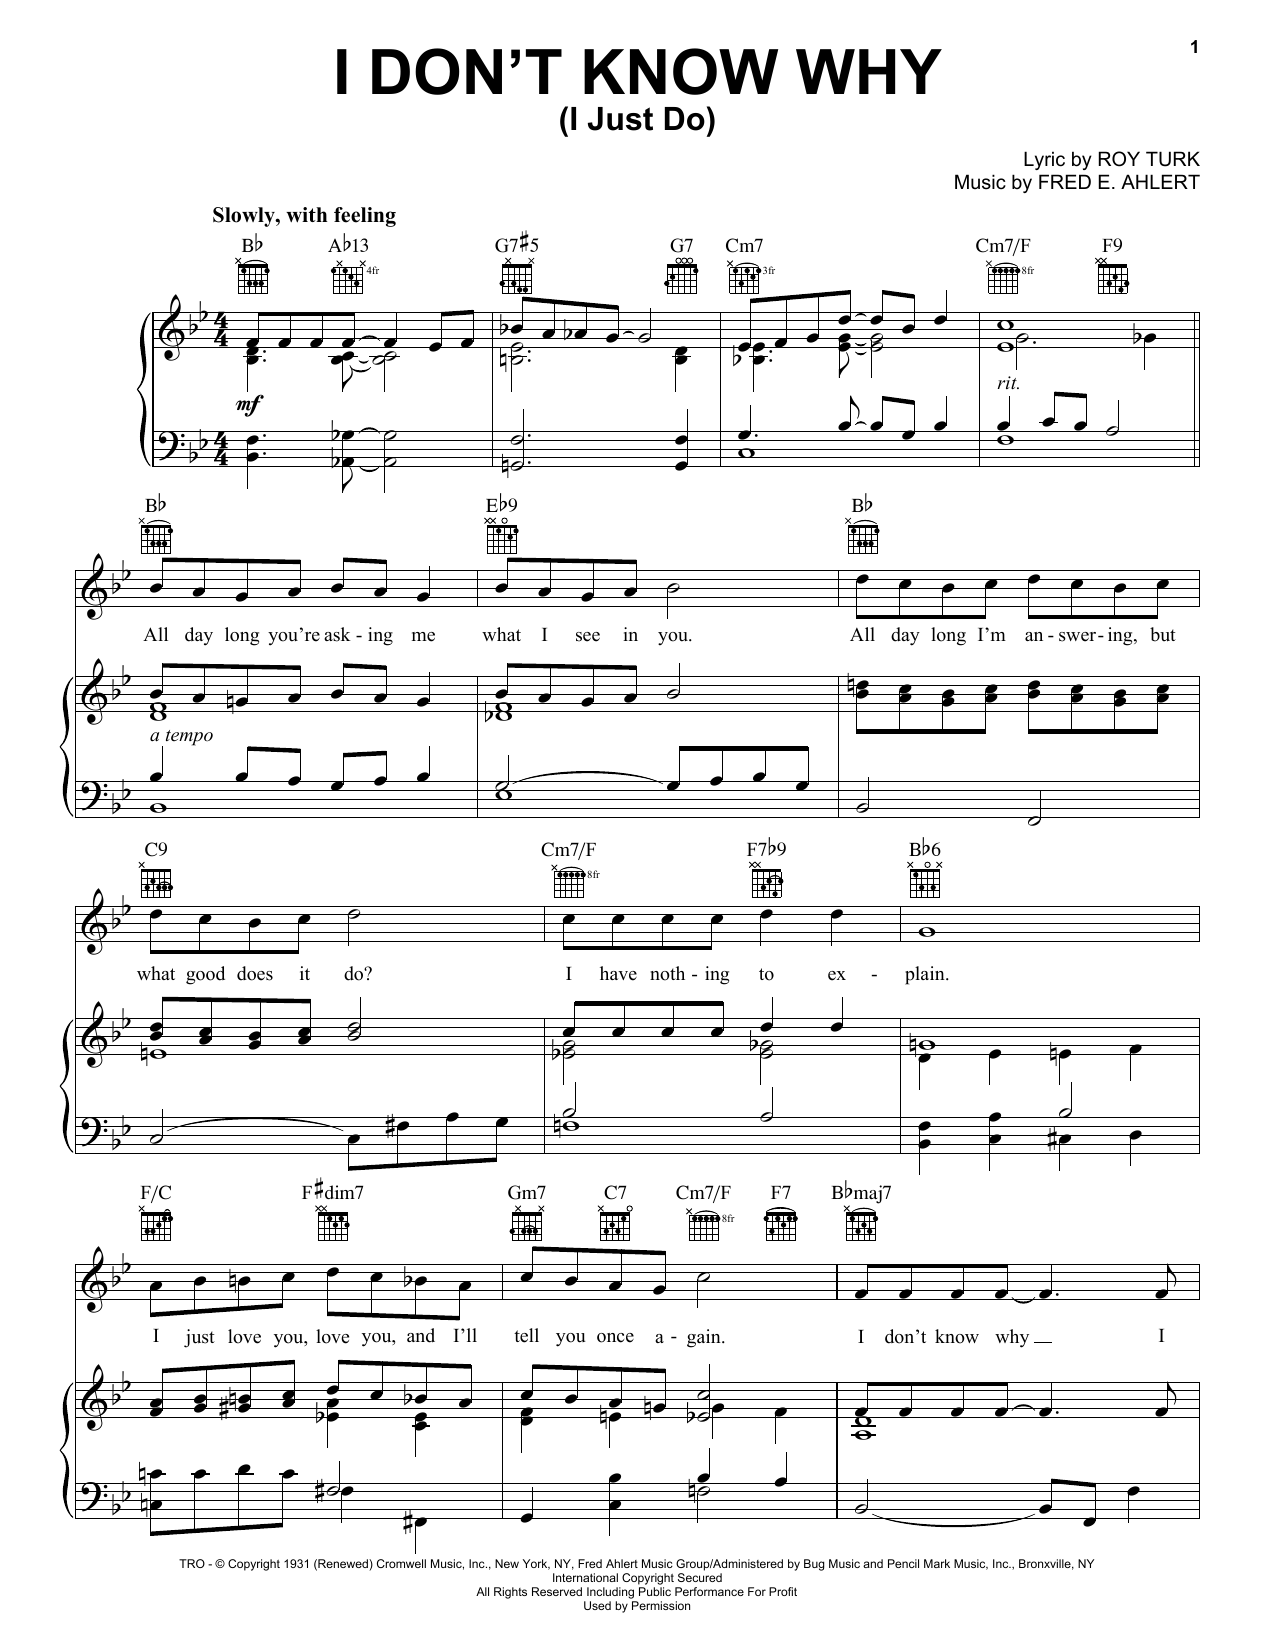 I Don't Know Why (I Just Do) sheet music